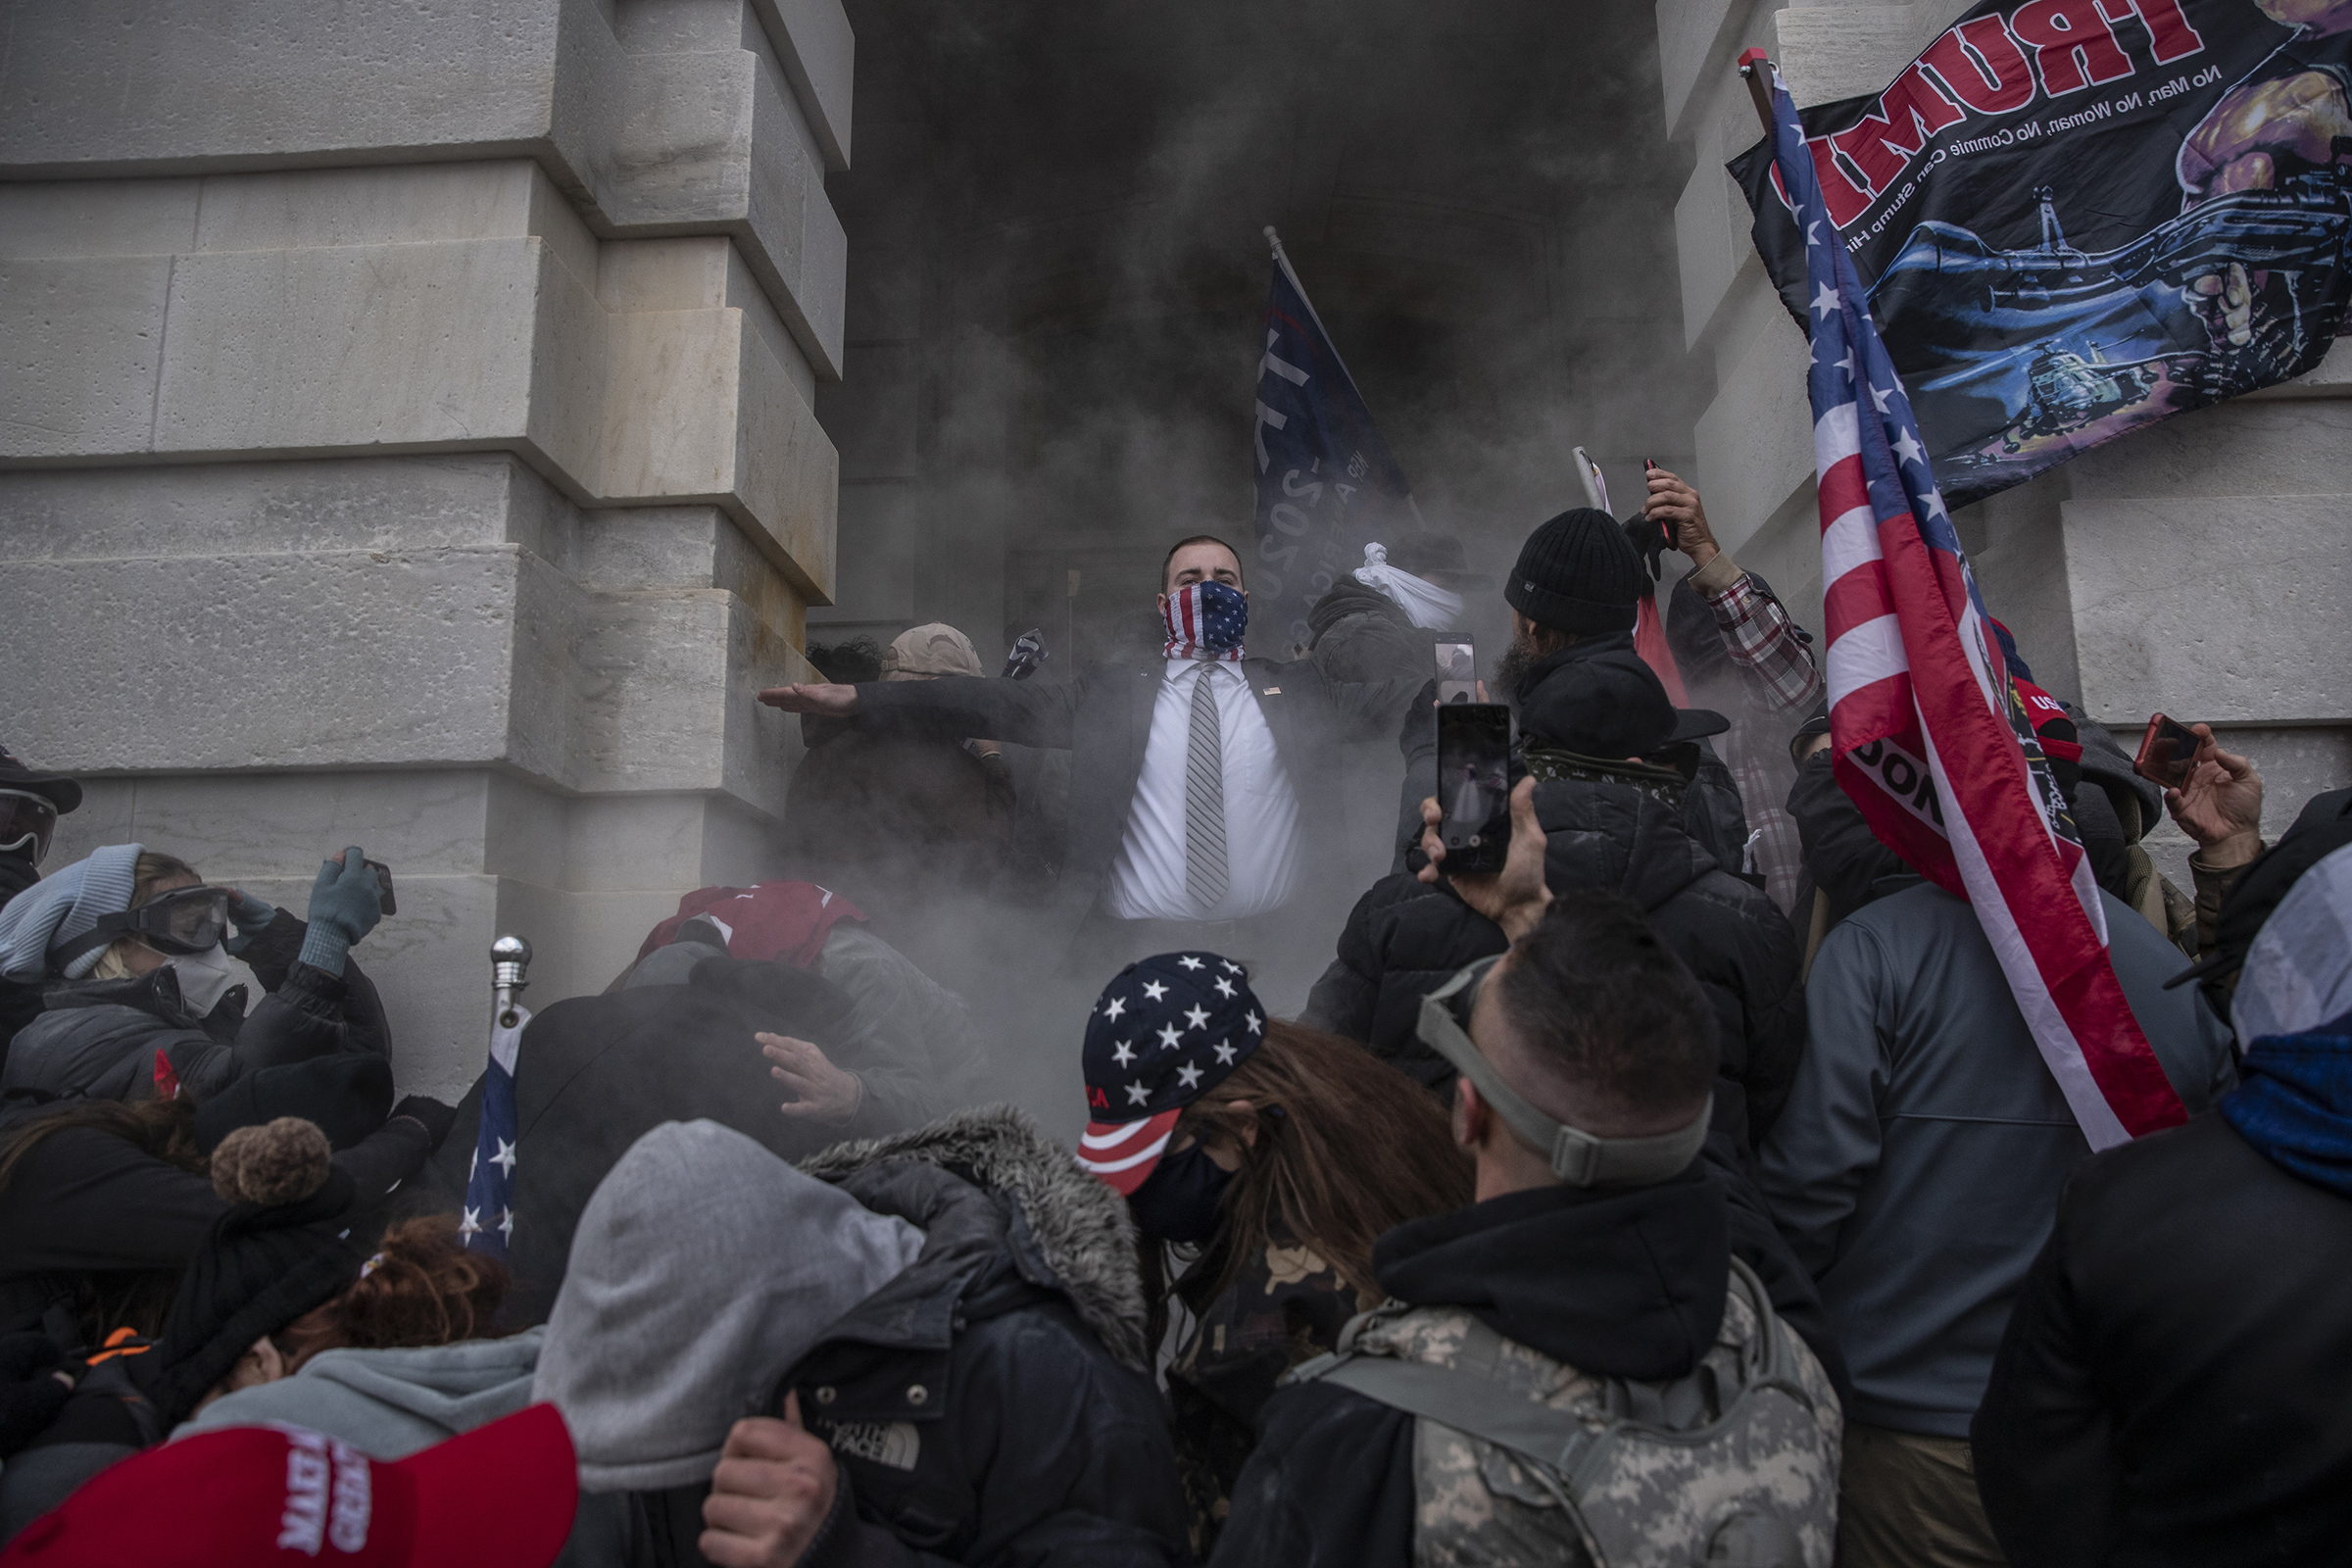 Demonstrators attempt to breach the U.S. Capitol after they earlier stormed the building in Washington D.C., on Jan. 6, 2021. (Victor J. Blue—Bloomberg/Getty Images)